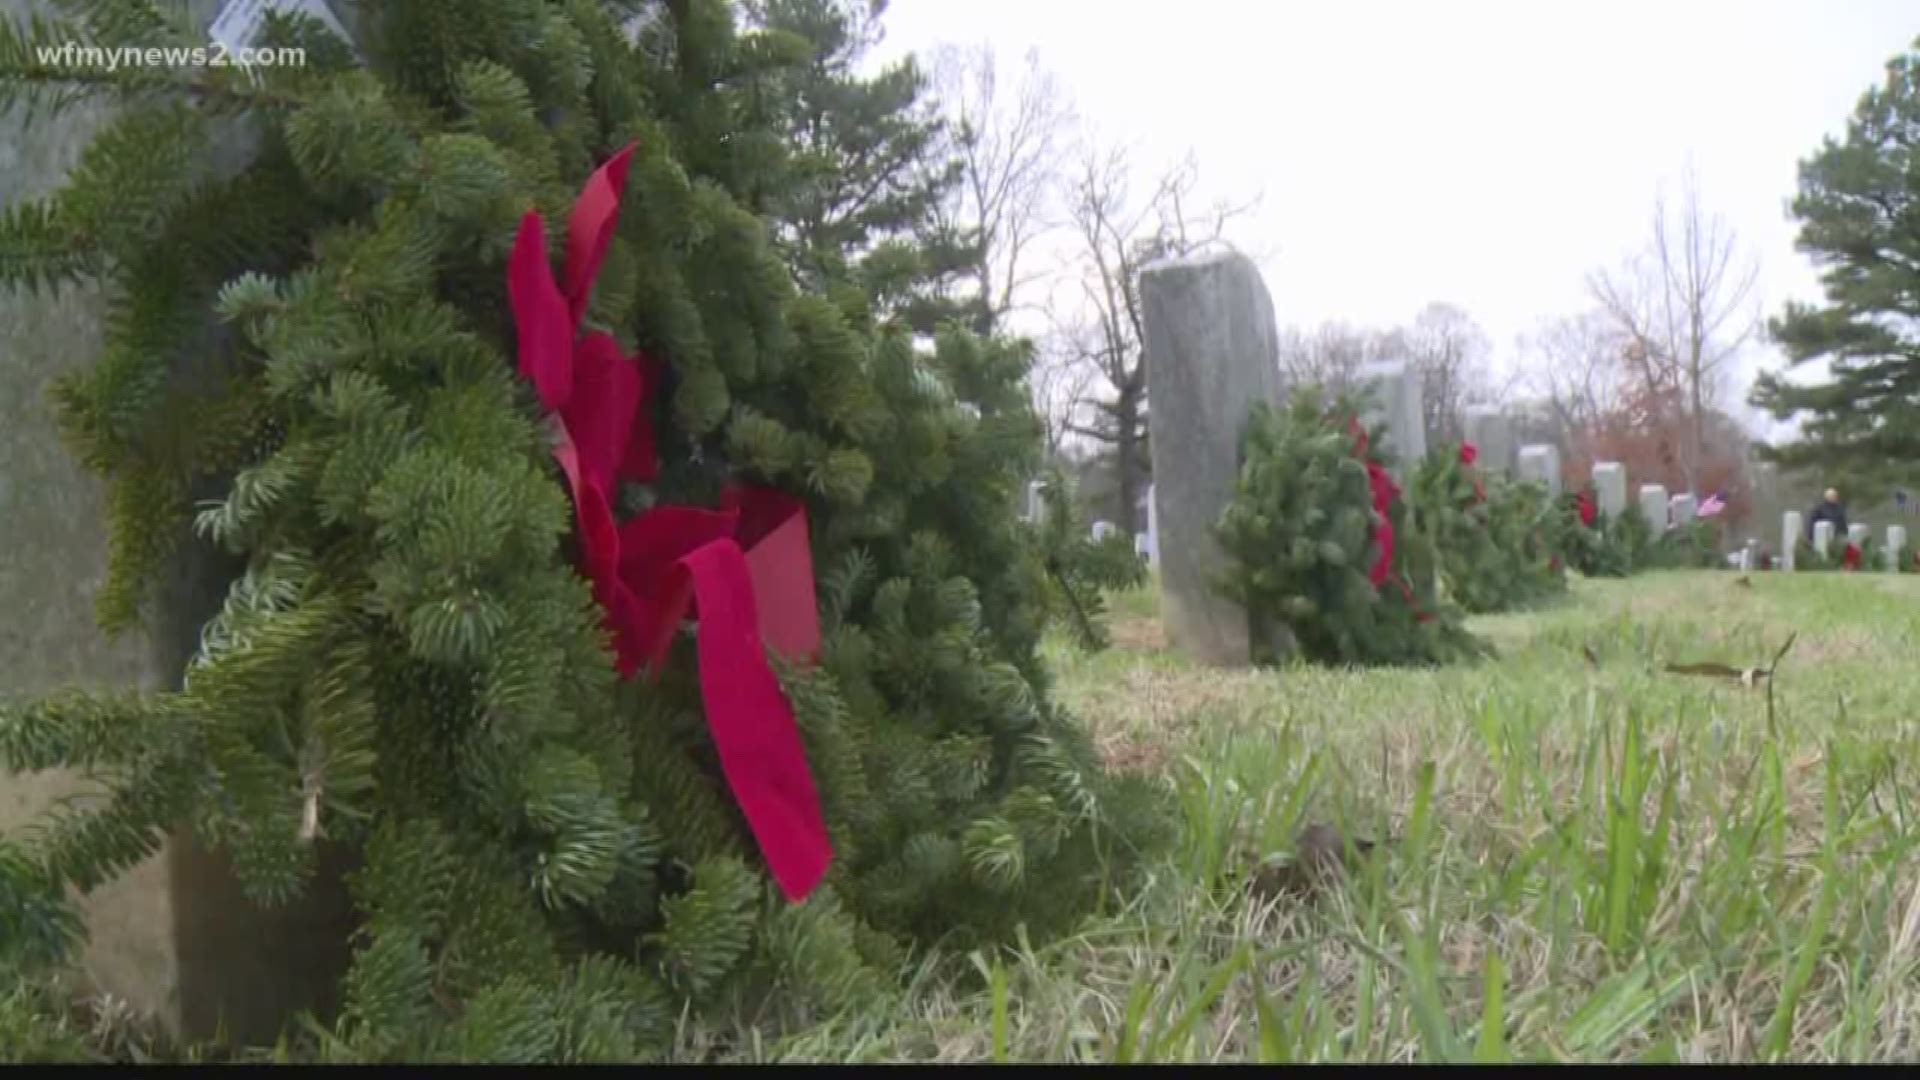 Wreaths Across Greensboro is this Saturday at Forest Lawn Cemetery.